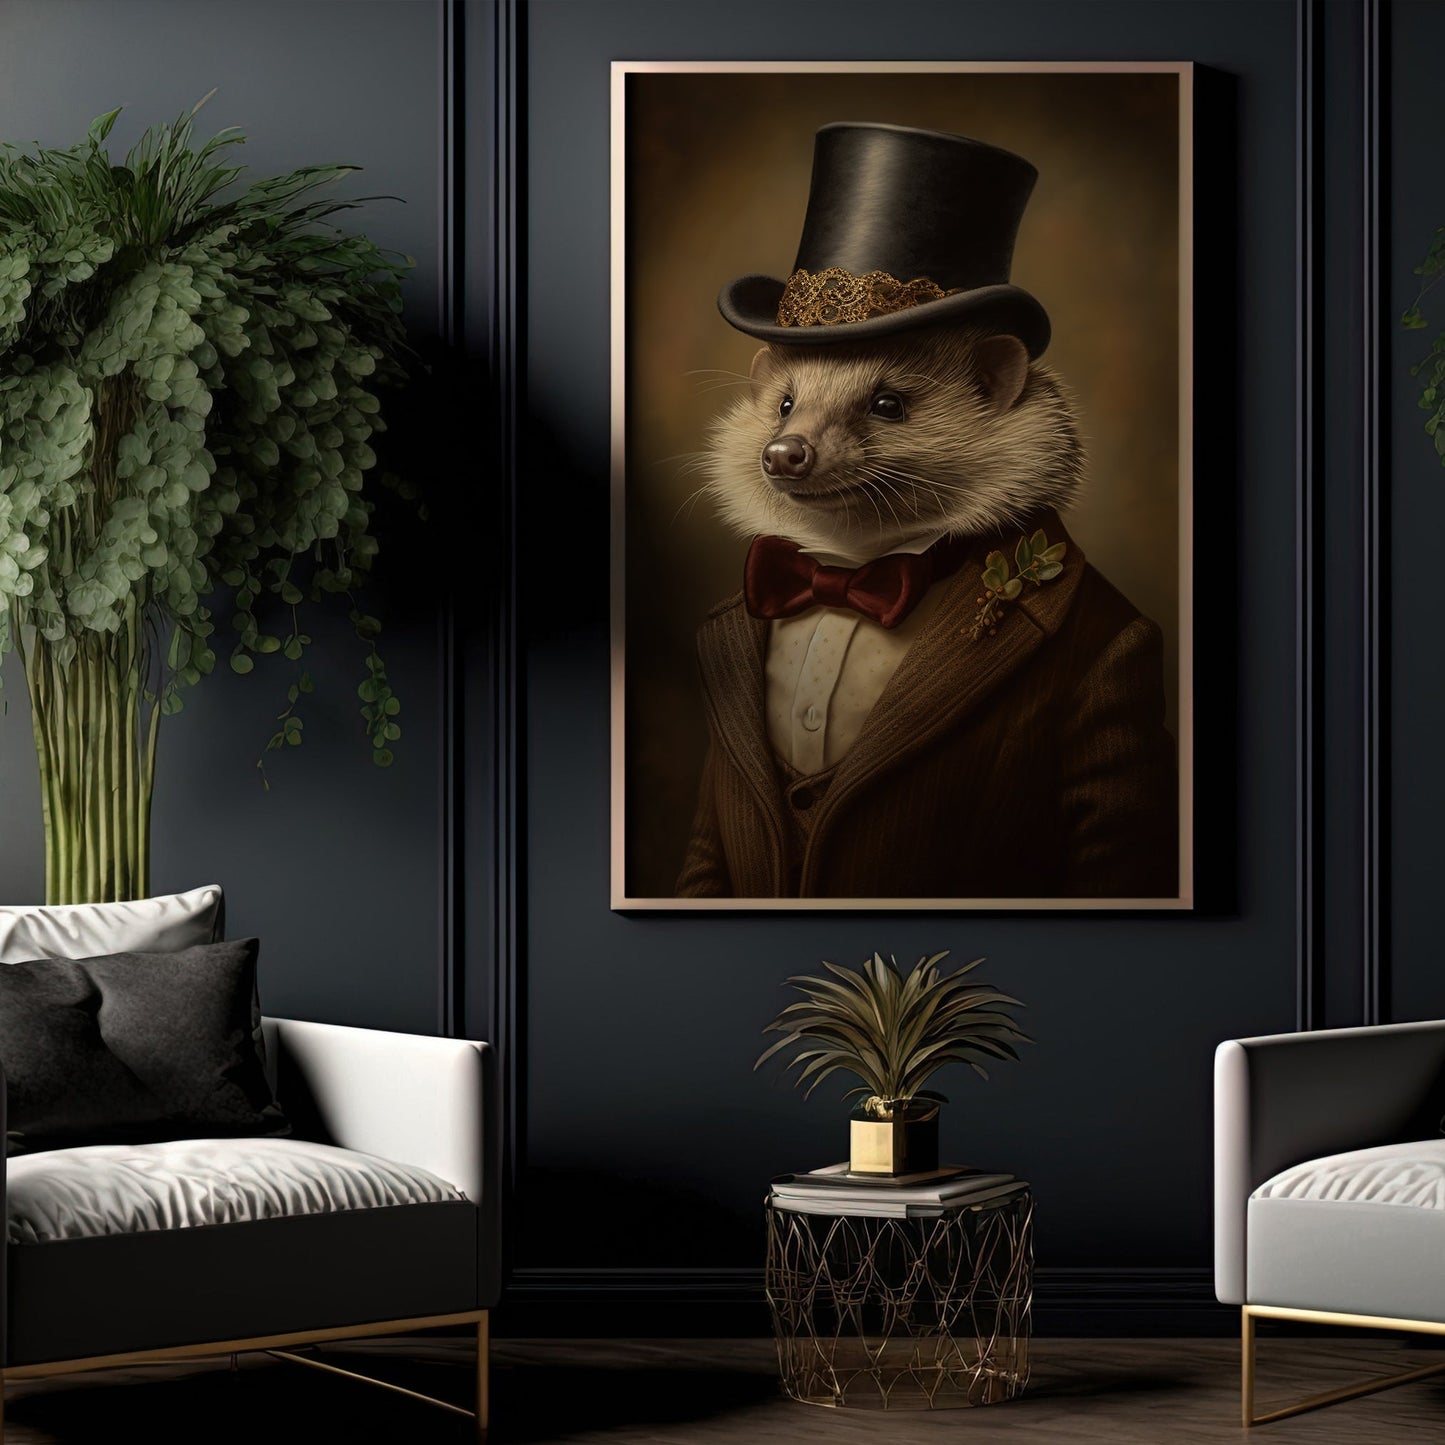 Otter In Victorian Style, Victorian Sea Otter Canvas Painting, Victorian Animal Wall Art Decor, Poster Gift For Sea Otter Lovers